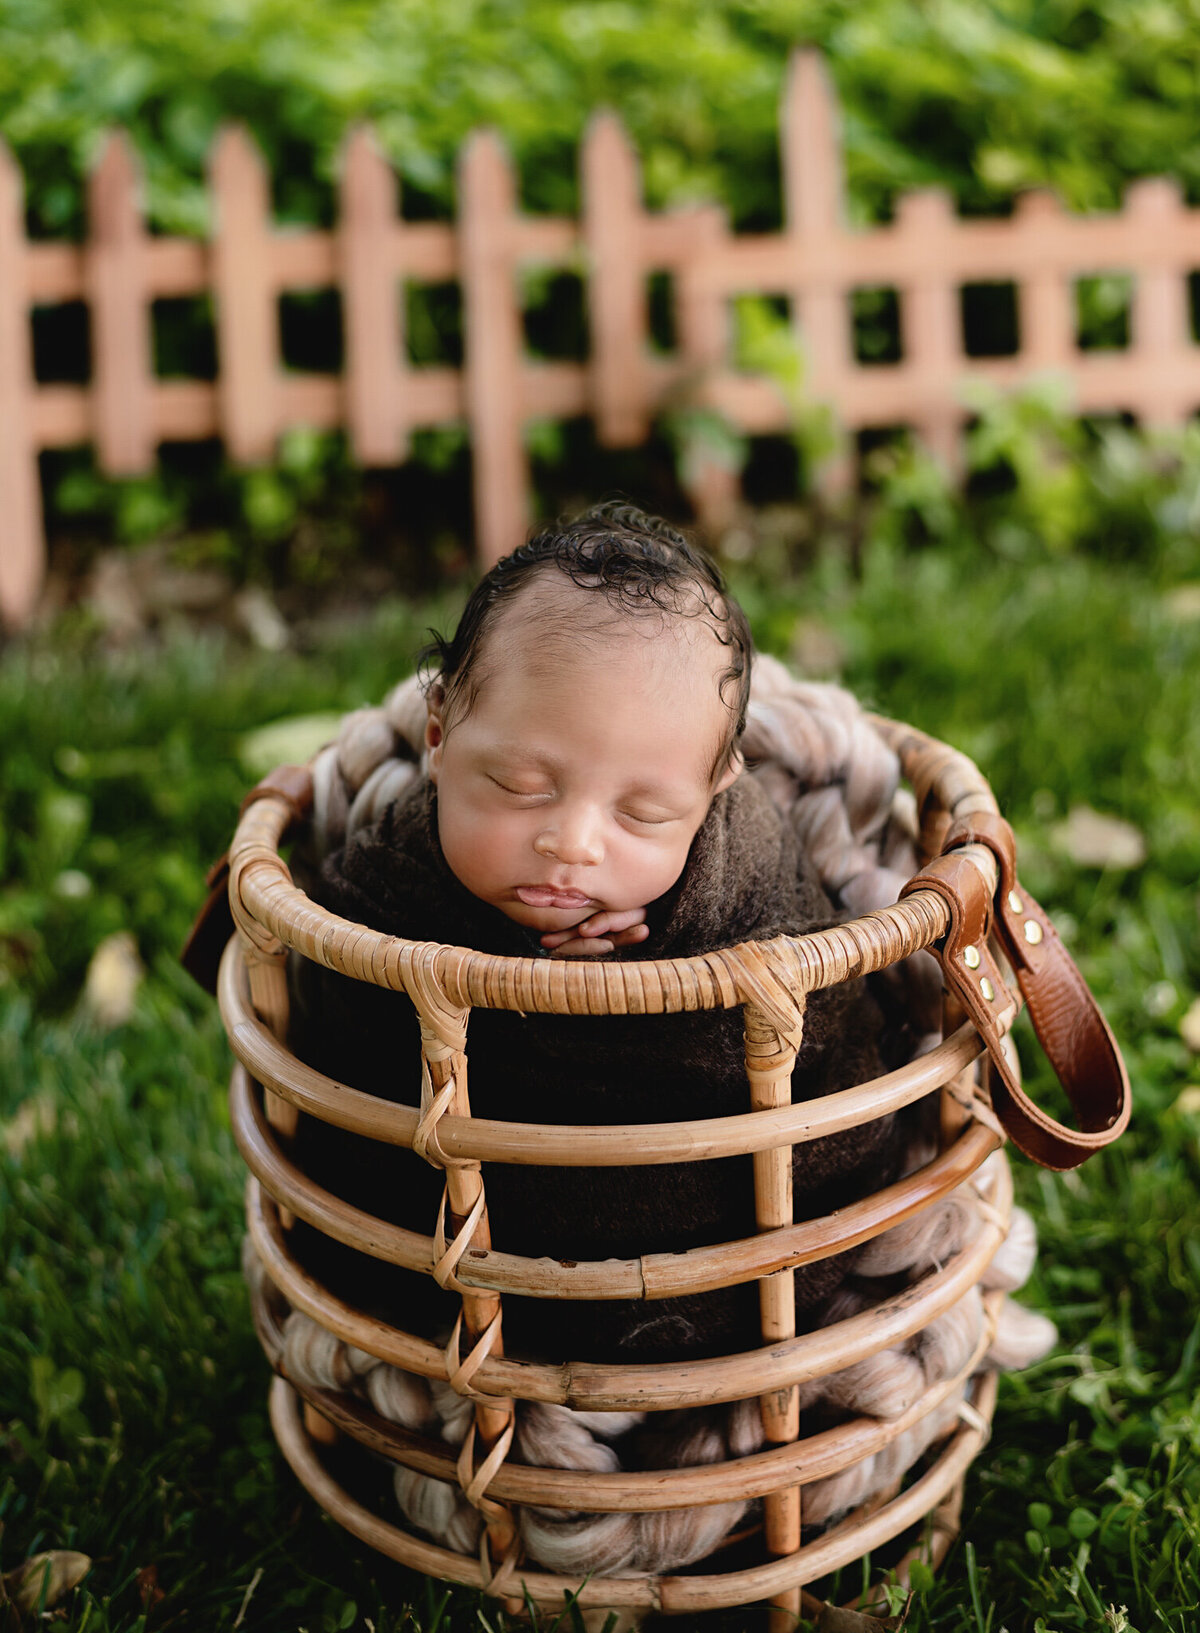 Infant boy sleeping in a basket at outdoor photo session.